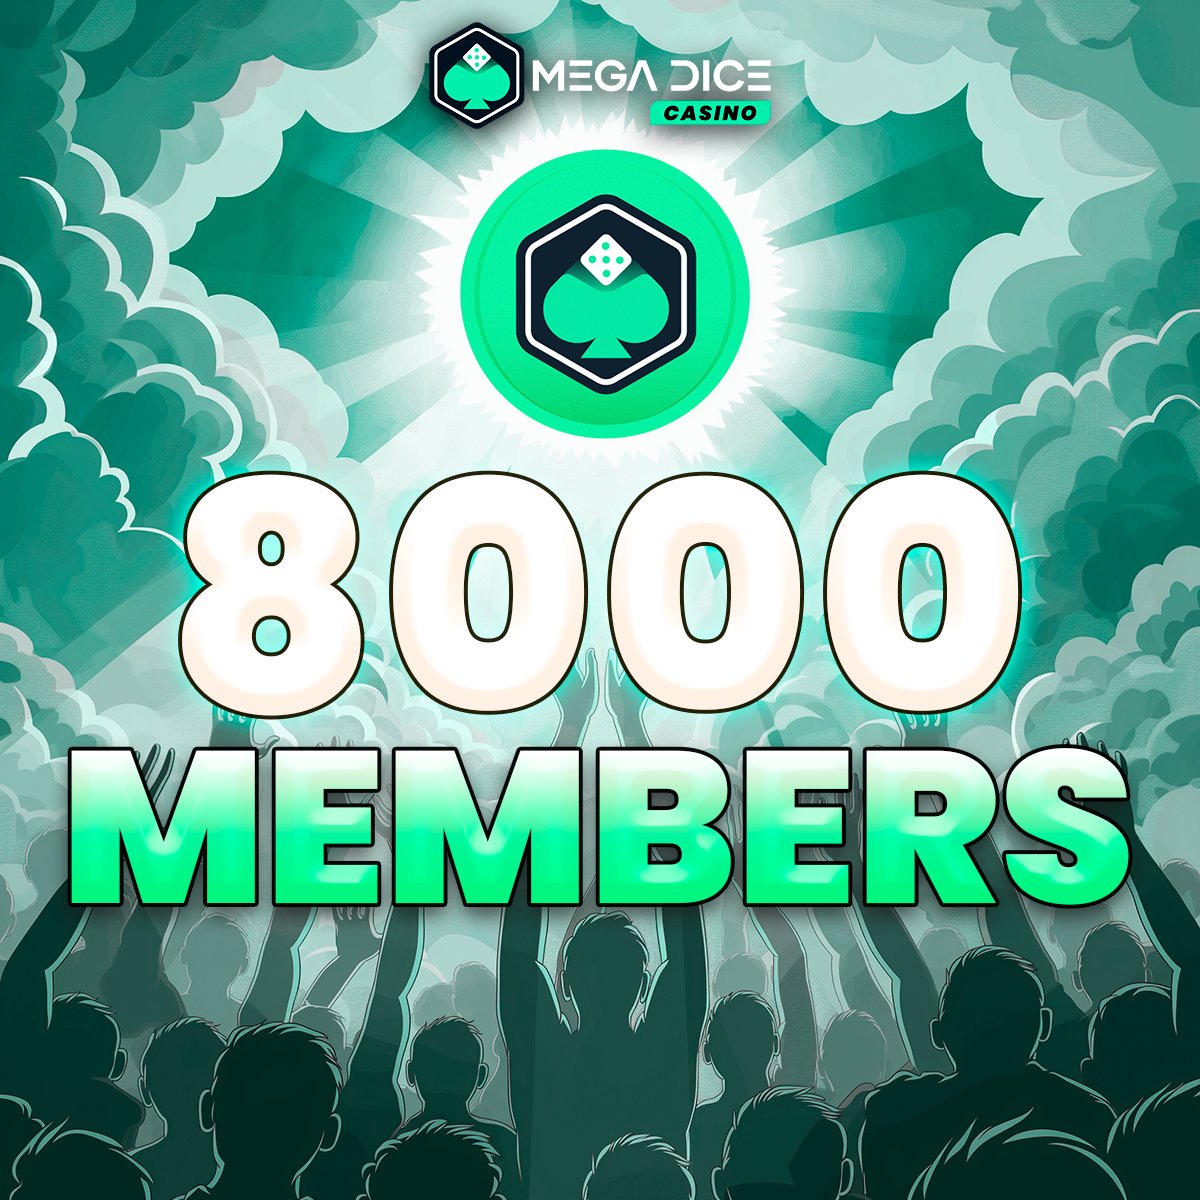 Another milestone reached at Mega Dice Casino & $DICE! 🎉 Our $DICE Telegram community has grown to 8000 strong! 📈

Join our community to chat about $DICE, casino, staking, sports and everything in between!

Join 👉🏻  t.me/Megadicecasino

#MegaDice #CommunityGrowth $DICE